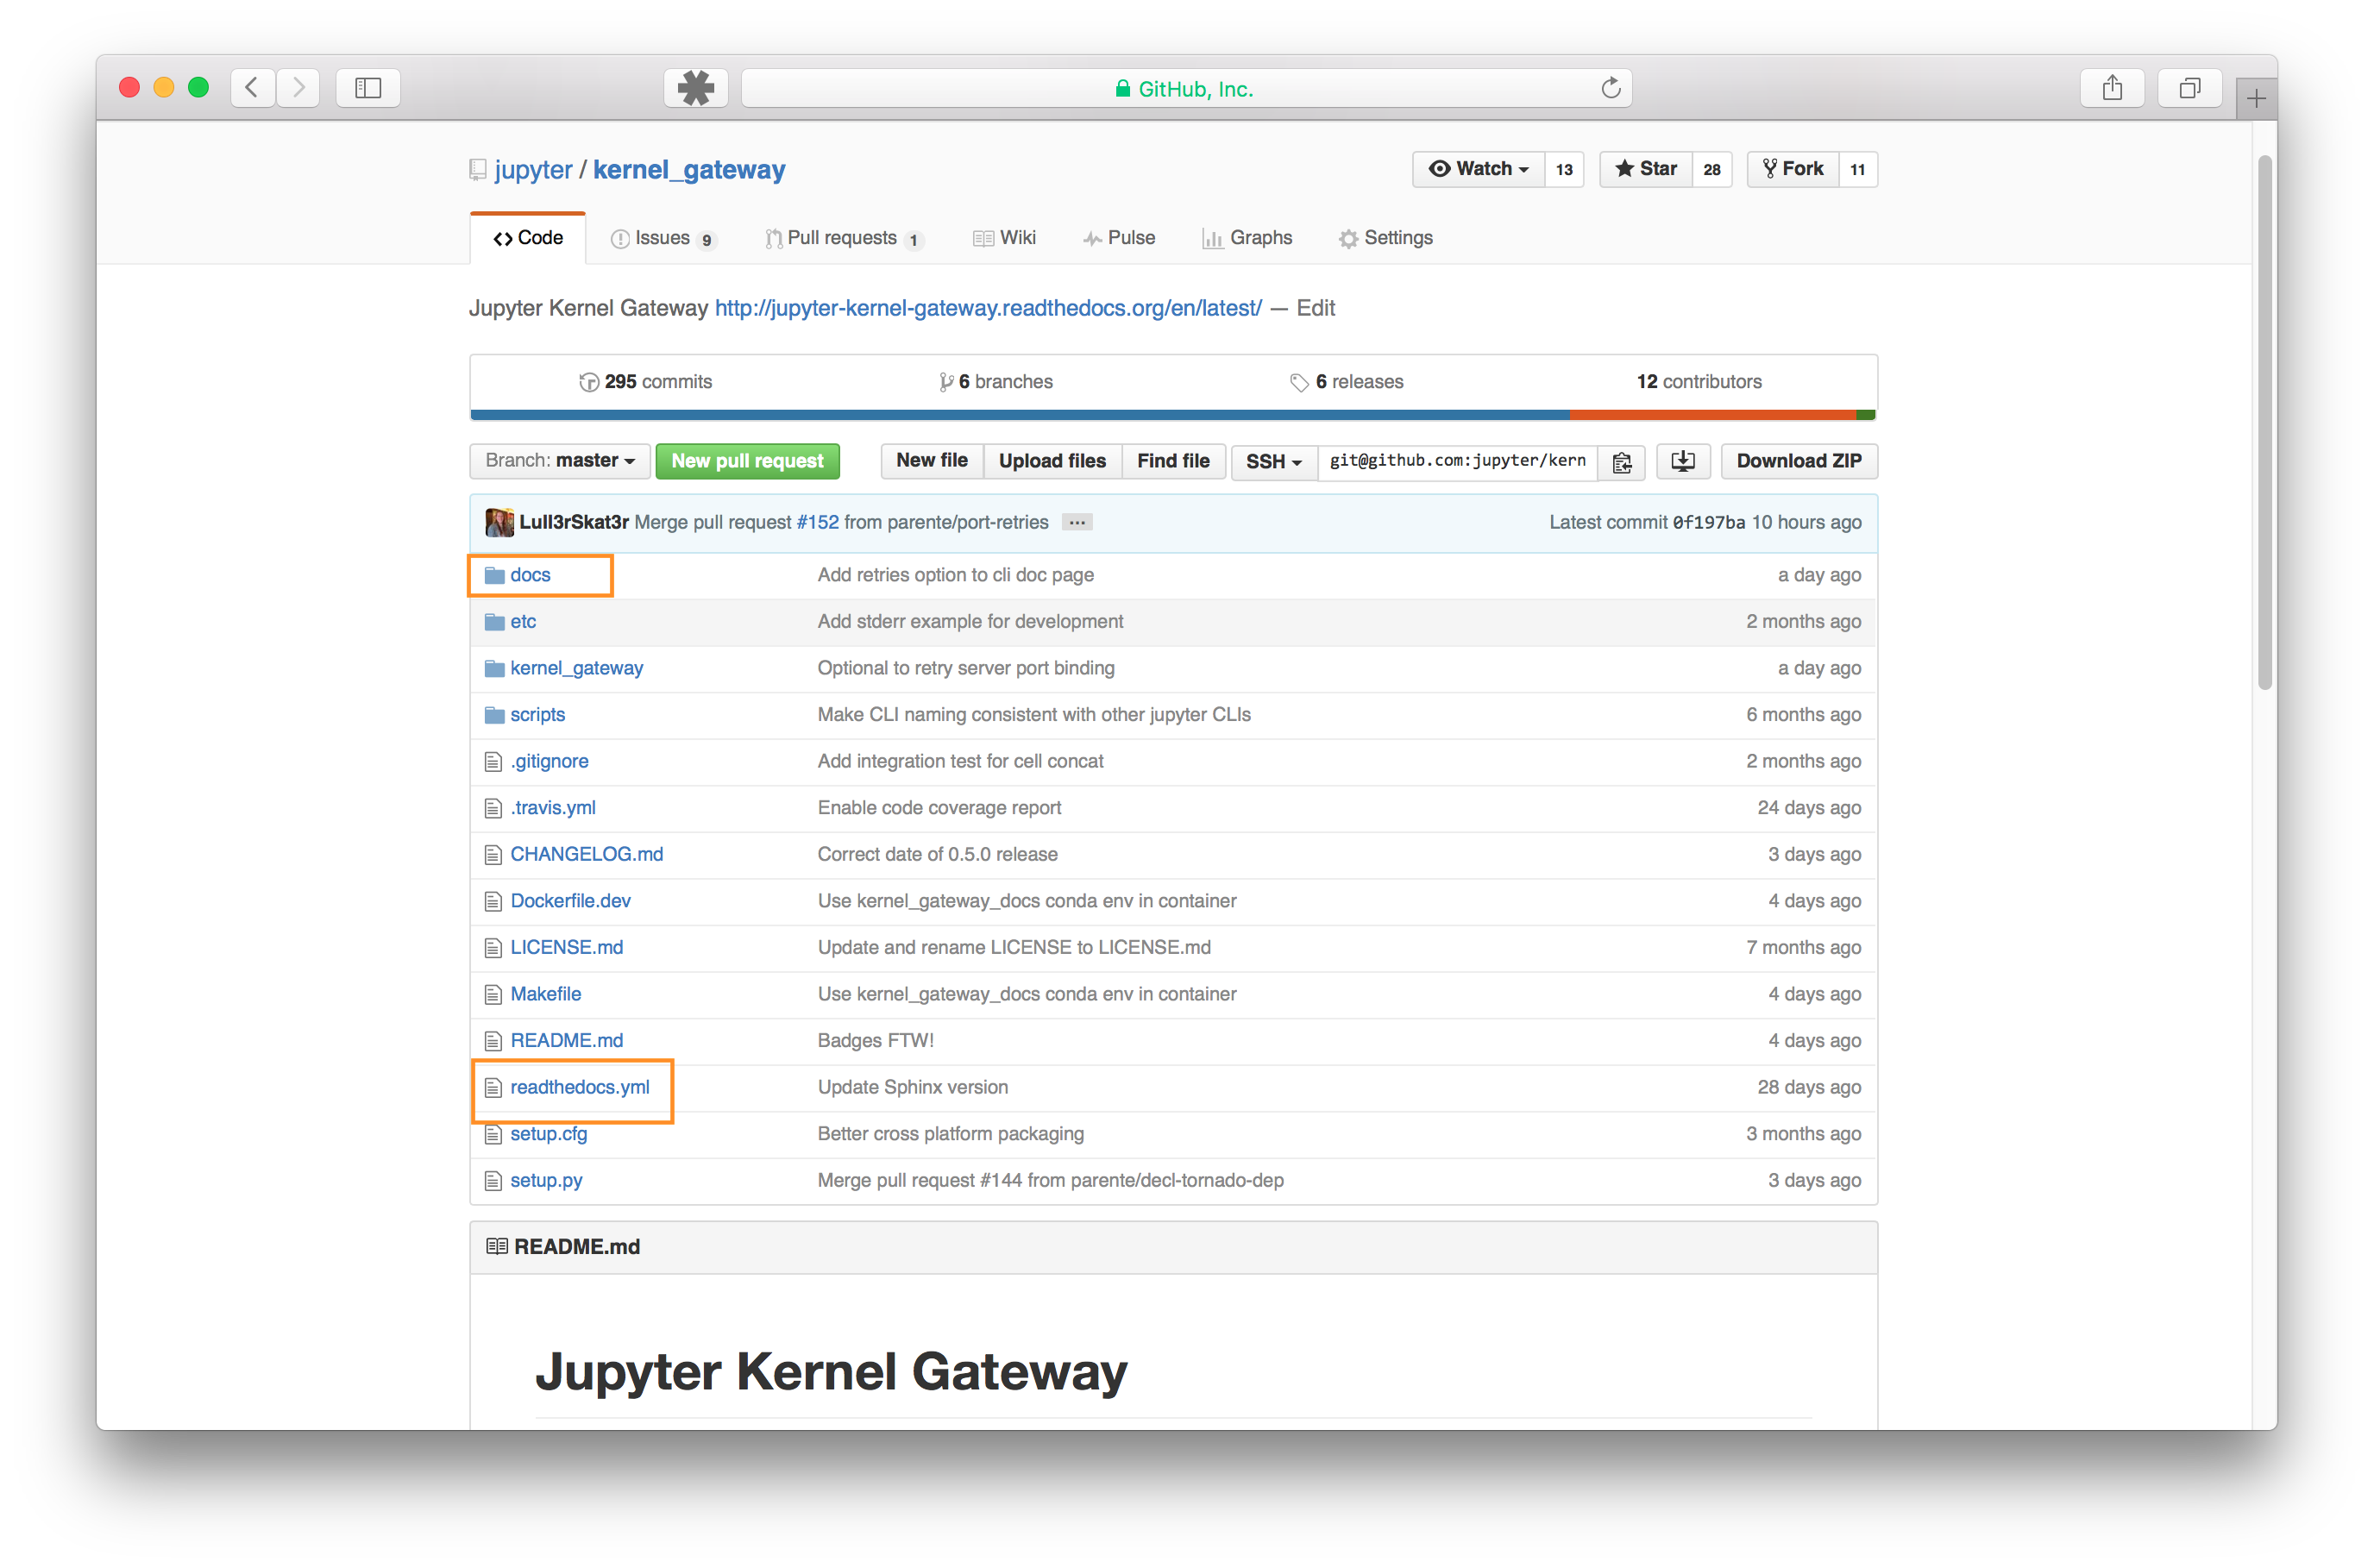 The root level of the jupyter kernel_gateway repo. There are orange boxes surrounding two elements in the directory structure: the docs folder and the readthedocs.yml file. The docs folder is the first element in the directory. The readthedocs.yml file is the 12th item in the directory.